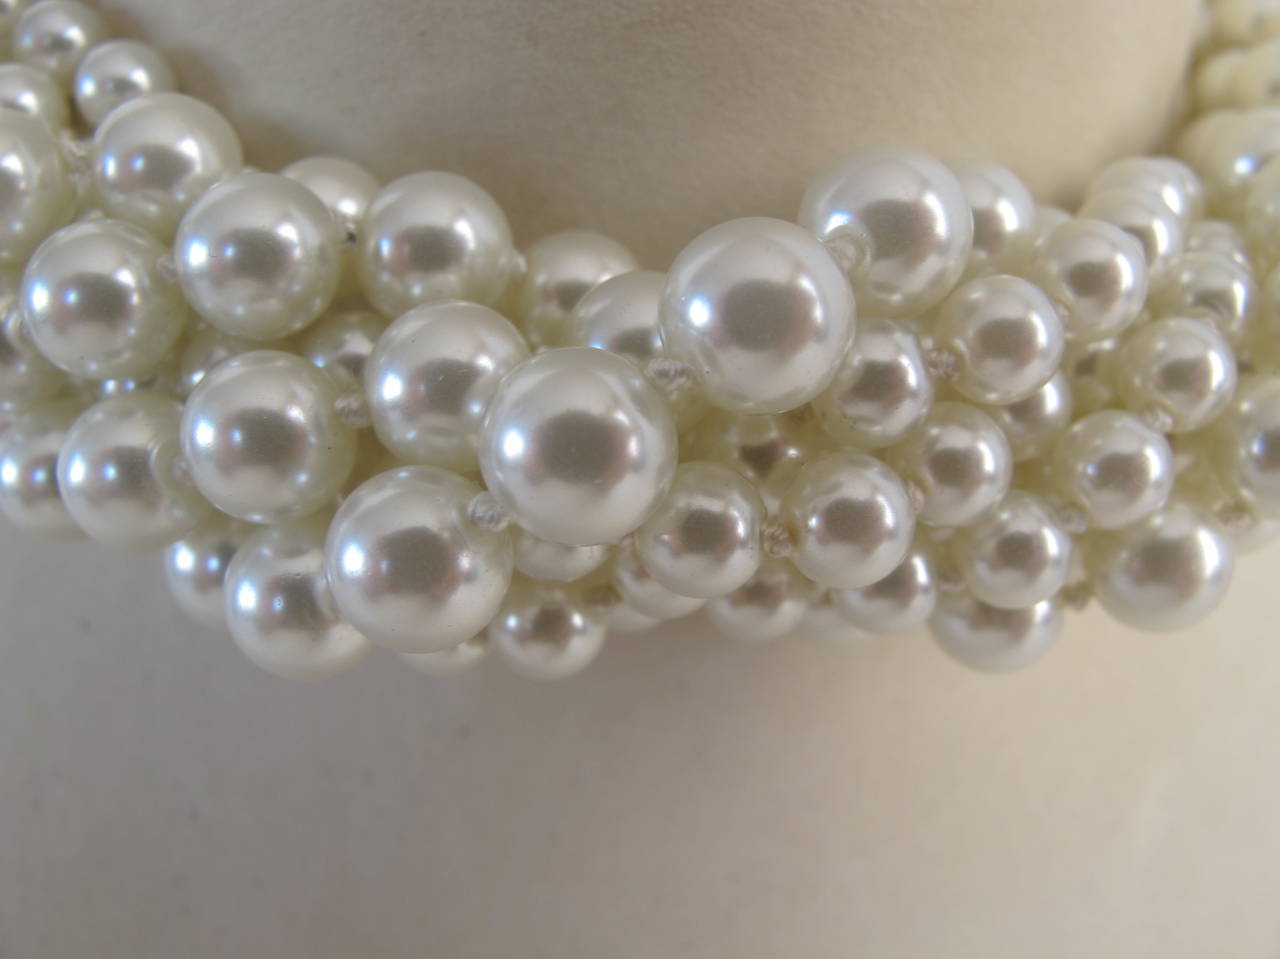 Women's 1960's Kenneth Jay Lane Multi-Strand Faux Pearl Necklace with Iconic Shell Clasp